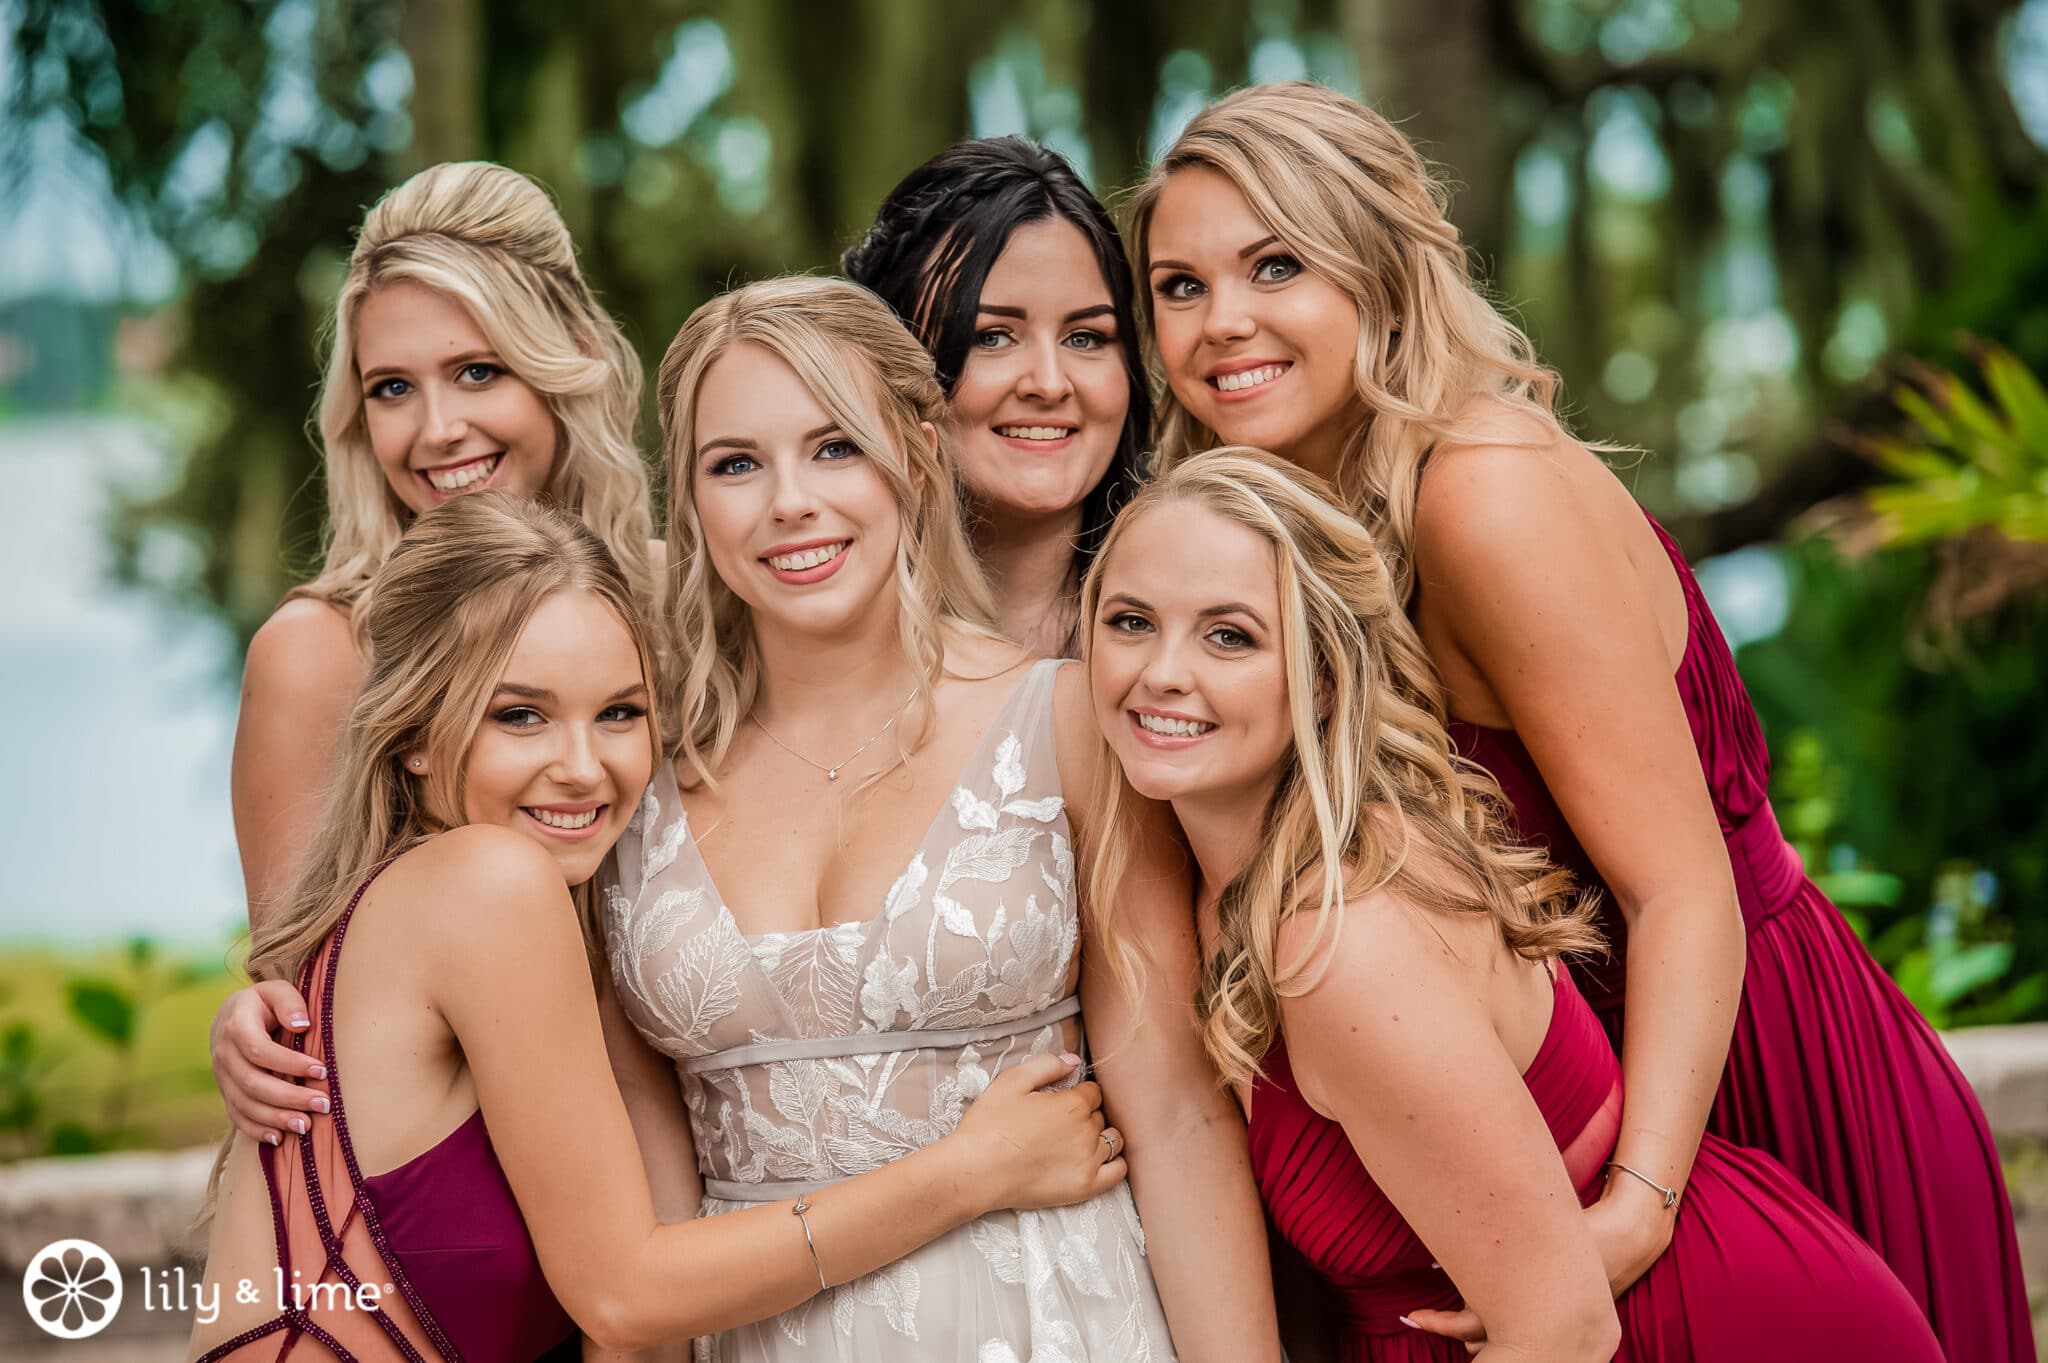 Bride with her bridesmaids. The bridesmaids are dressed in red